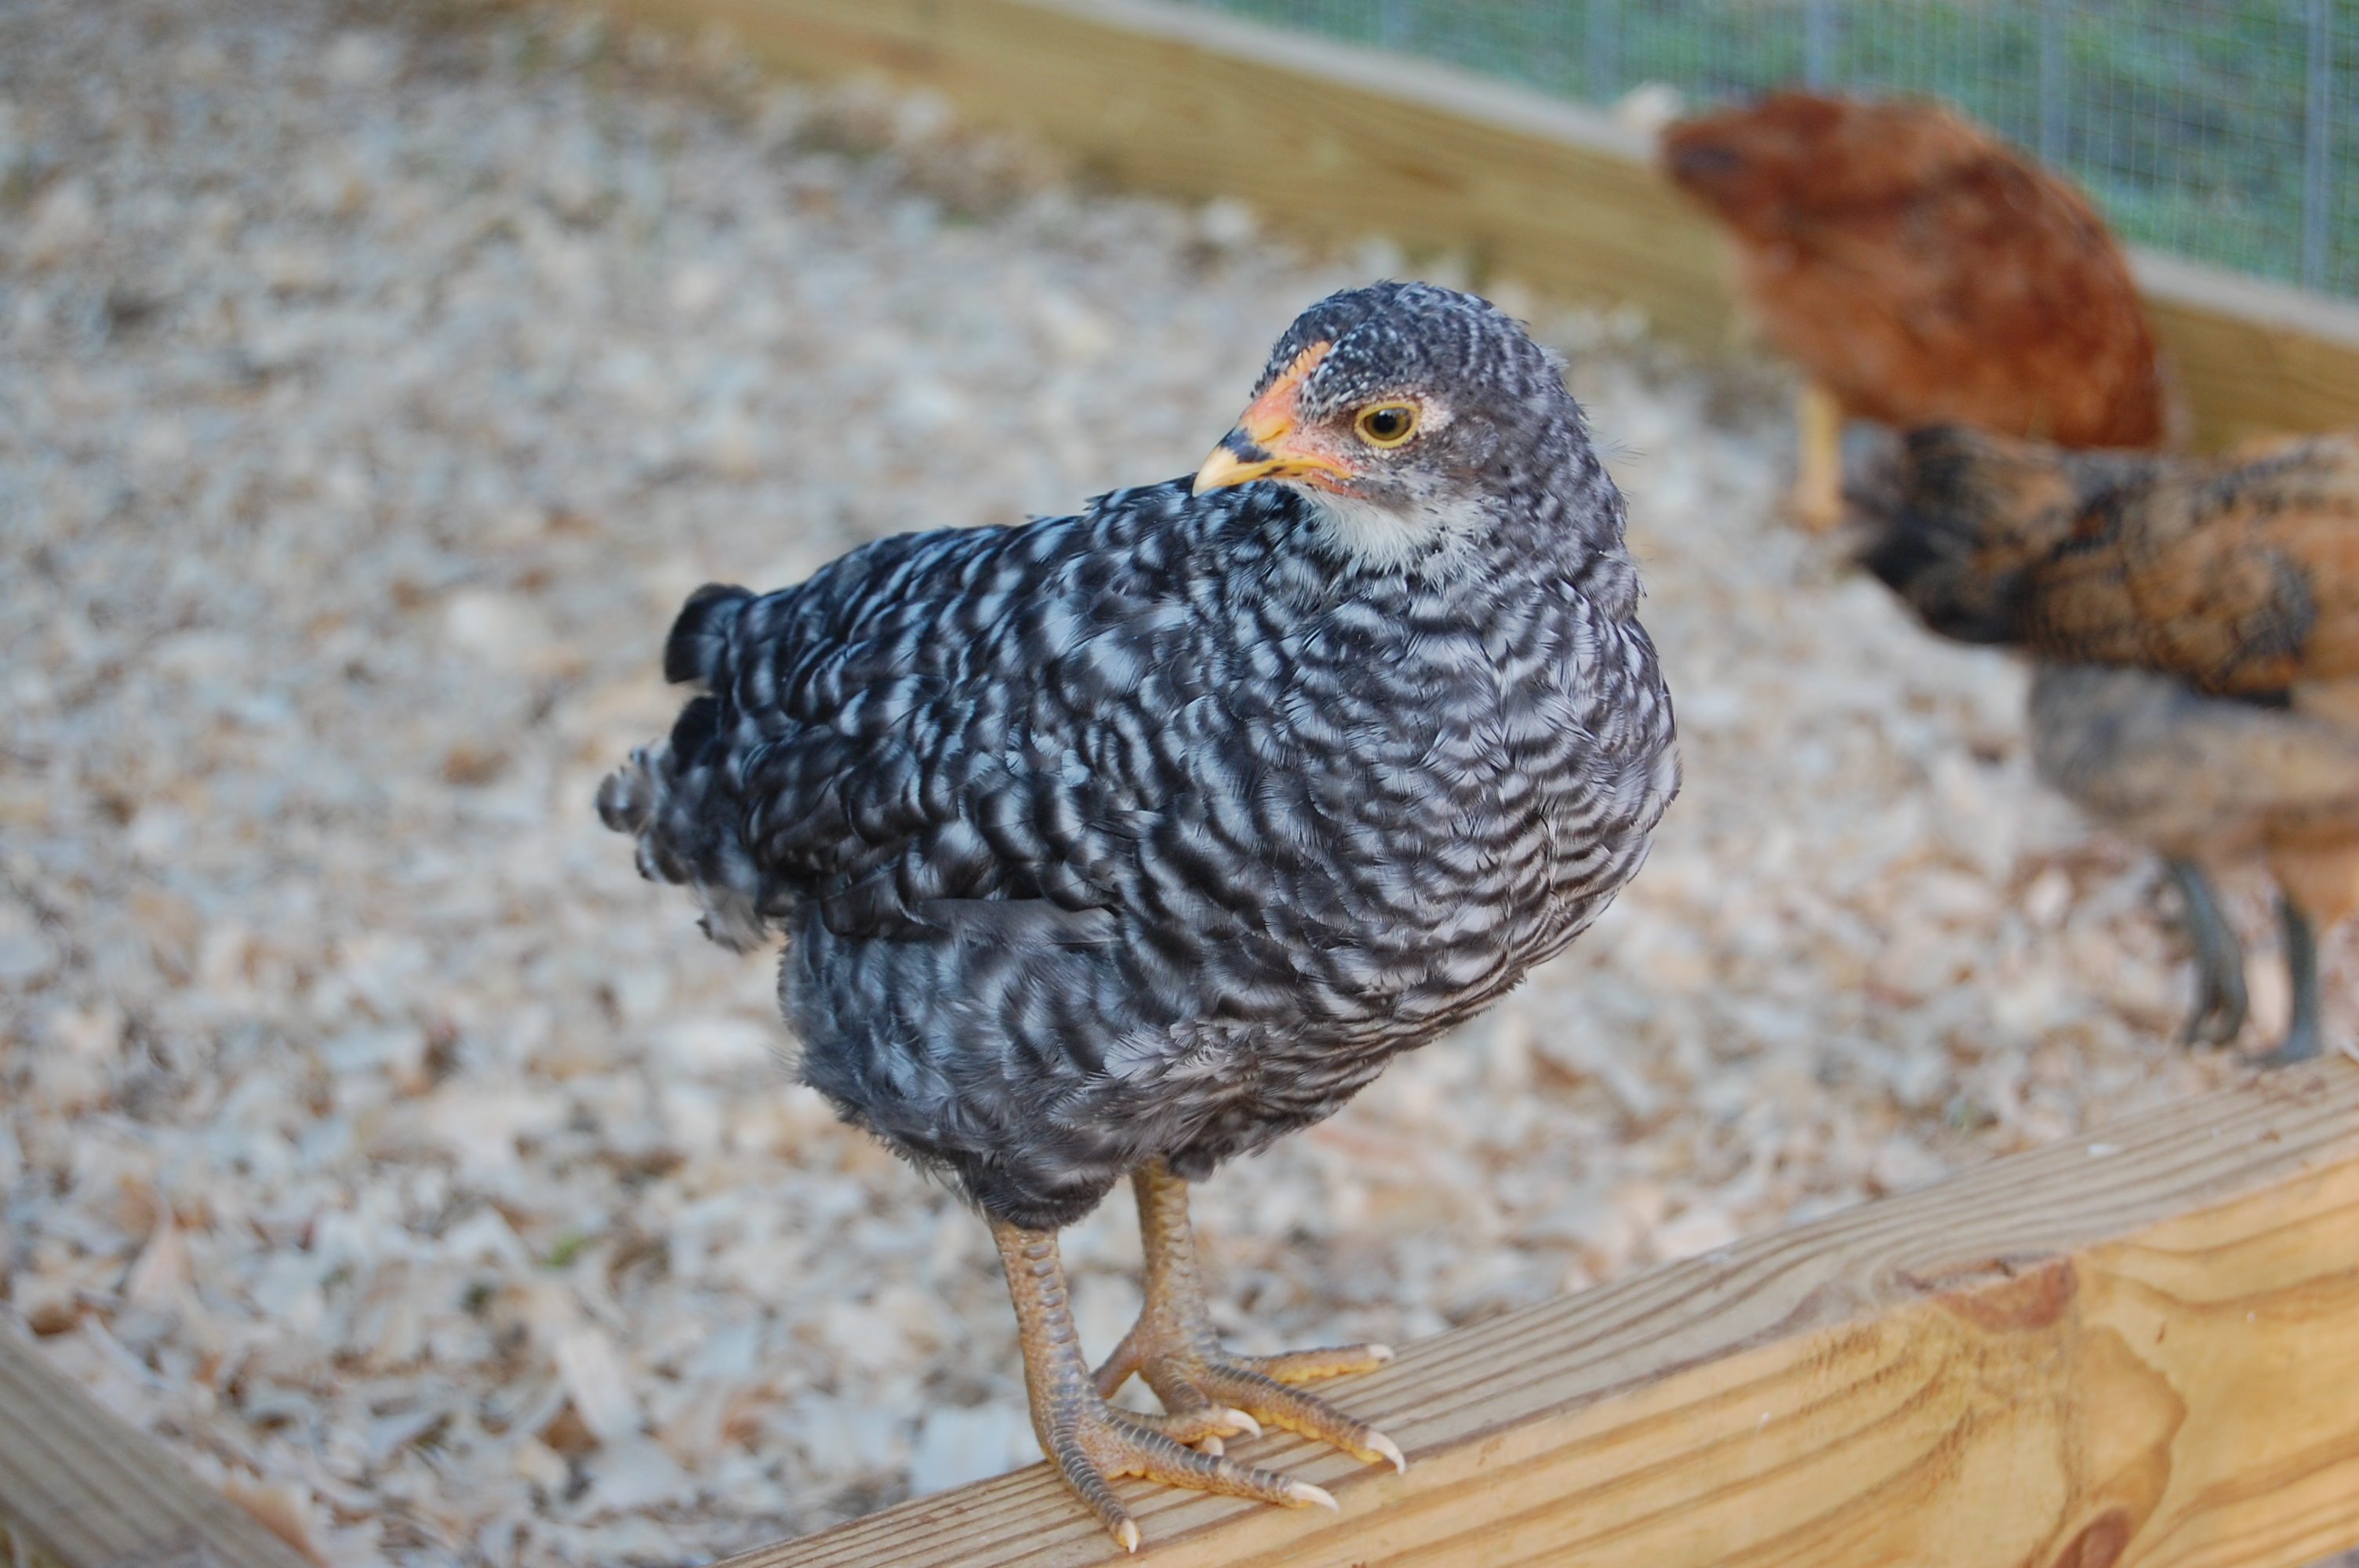 It appears that the Barred Rocks like to have their pics made, LOL!